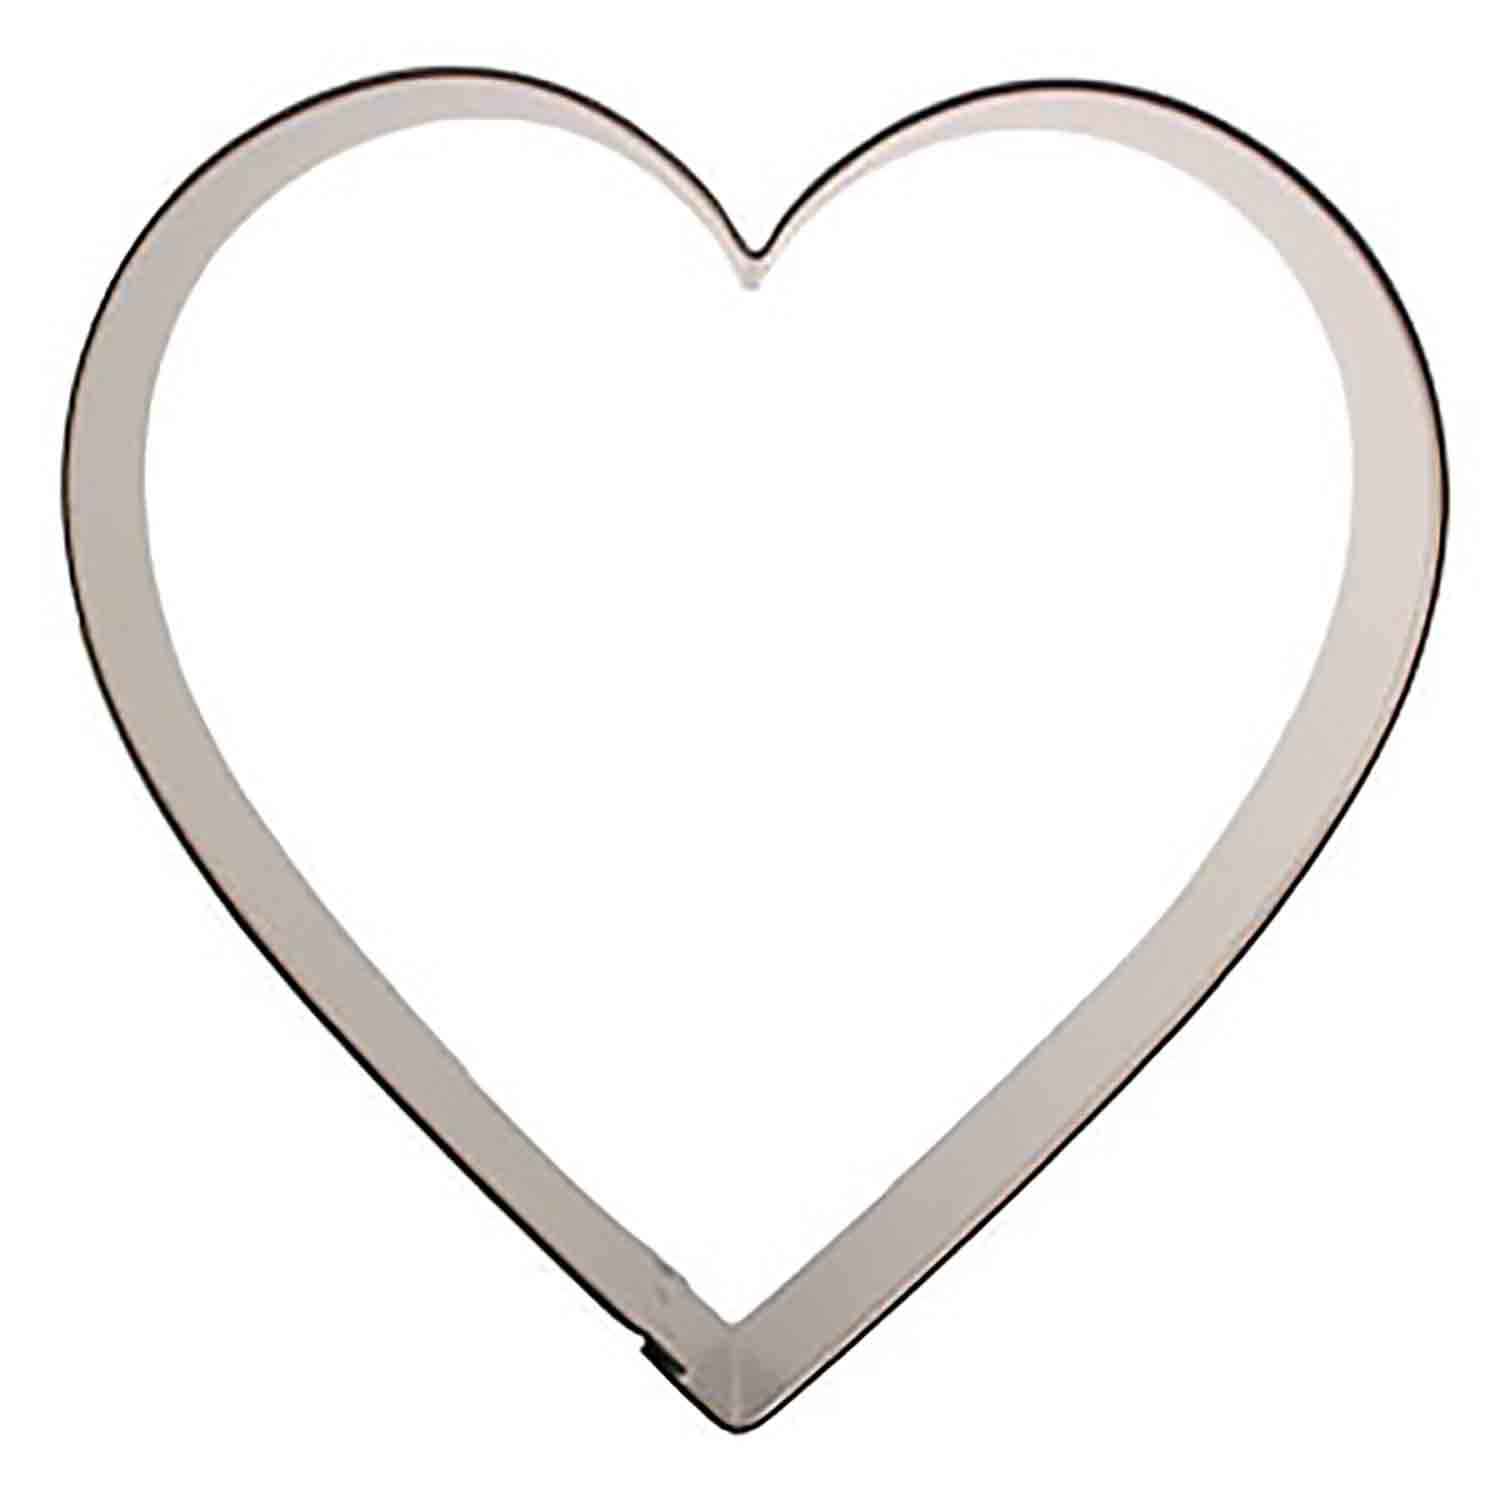 R&M Heart 5 Cookie Cutter in Durable, Economical, Tinplated Steel